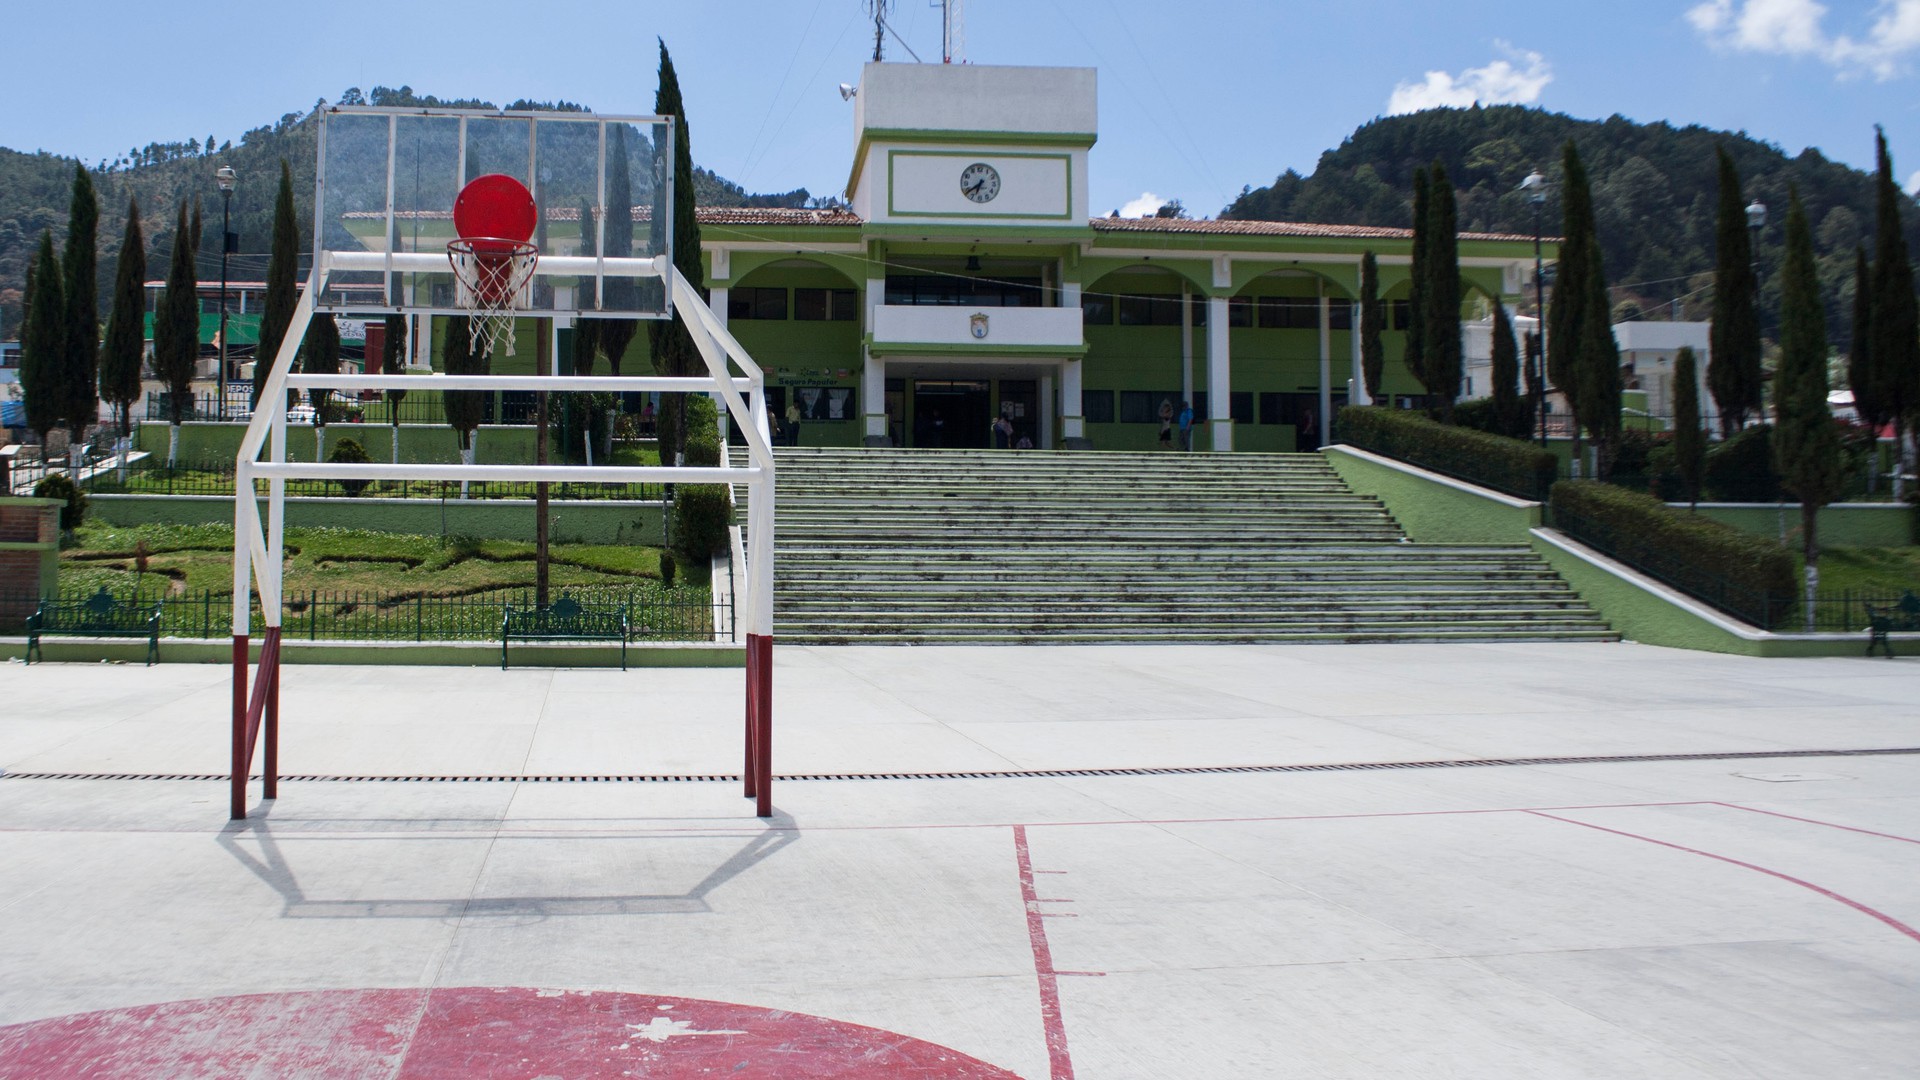 A basketball court sits in front of the municipal building in Zinacantán, Chiapas, Mexico. Basketball courts are often near government, religious or educational buildings in the Chiapas highlands. (Photo by Jessie Wardarski.)